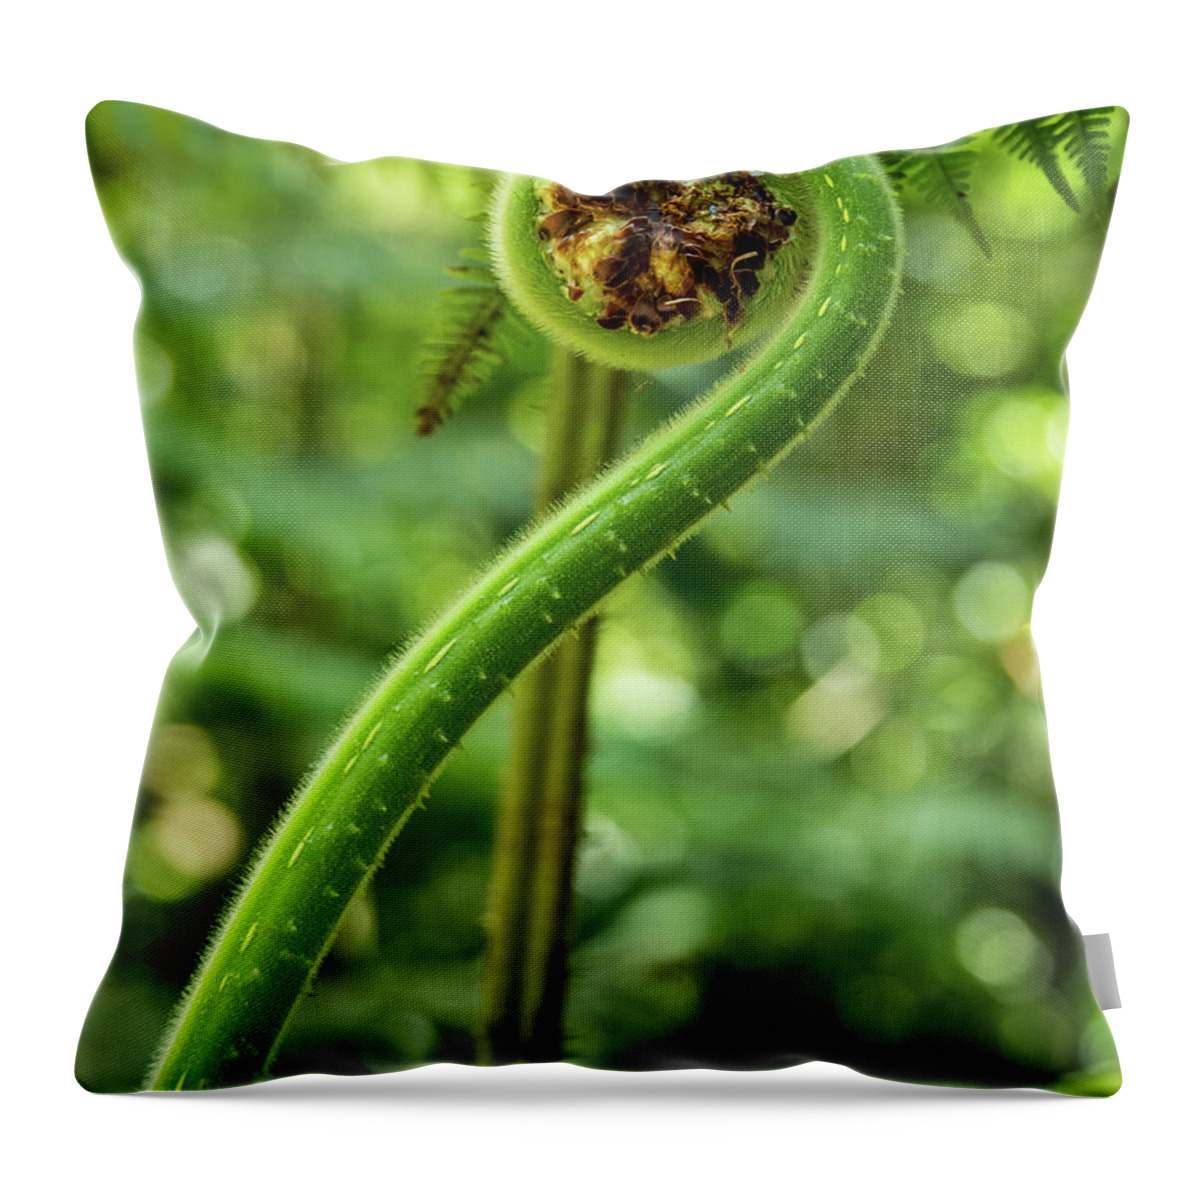 Spring Throw Pillow featuring the photograph What's New Fiddlehead by Leslie Struxness